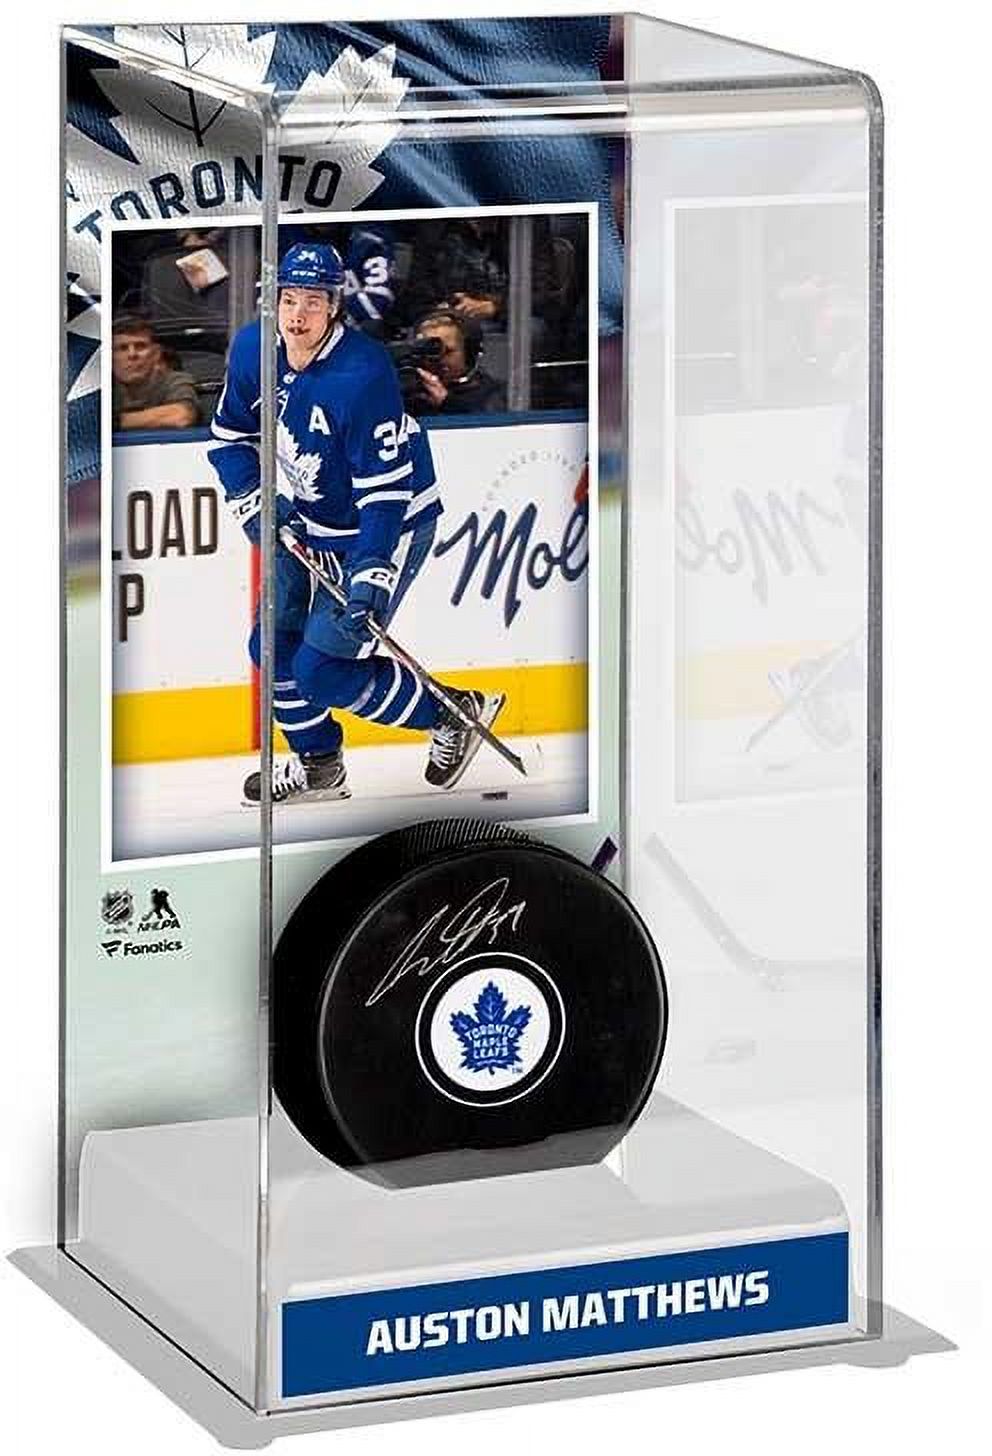 Auston Matthews Toronto Maple Leafs Autographed Puck with Deluxe Tall Hockey Puck Case - eBay Exclusive - Fanatics Authentic Certified - image 1 of 2